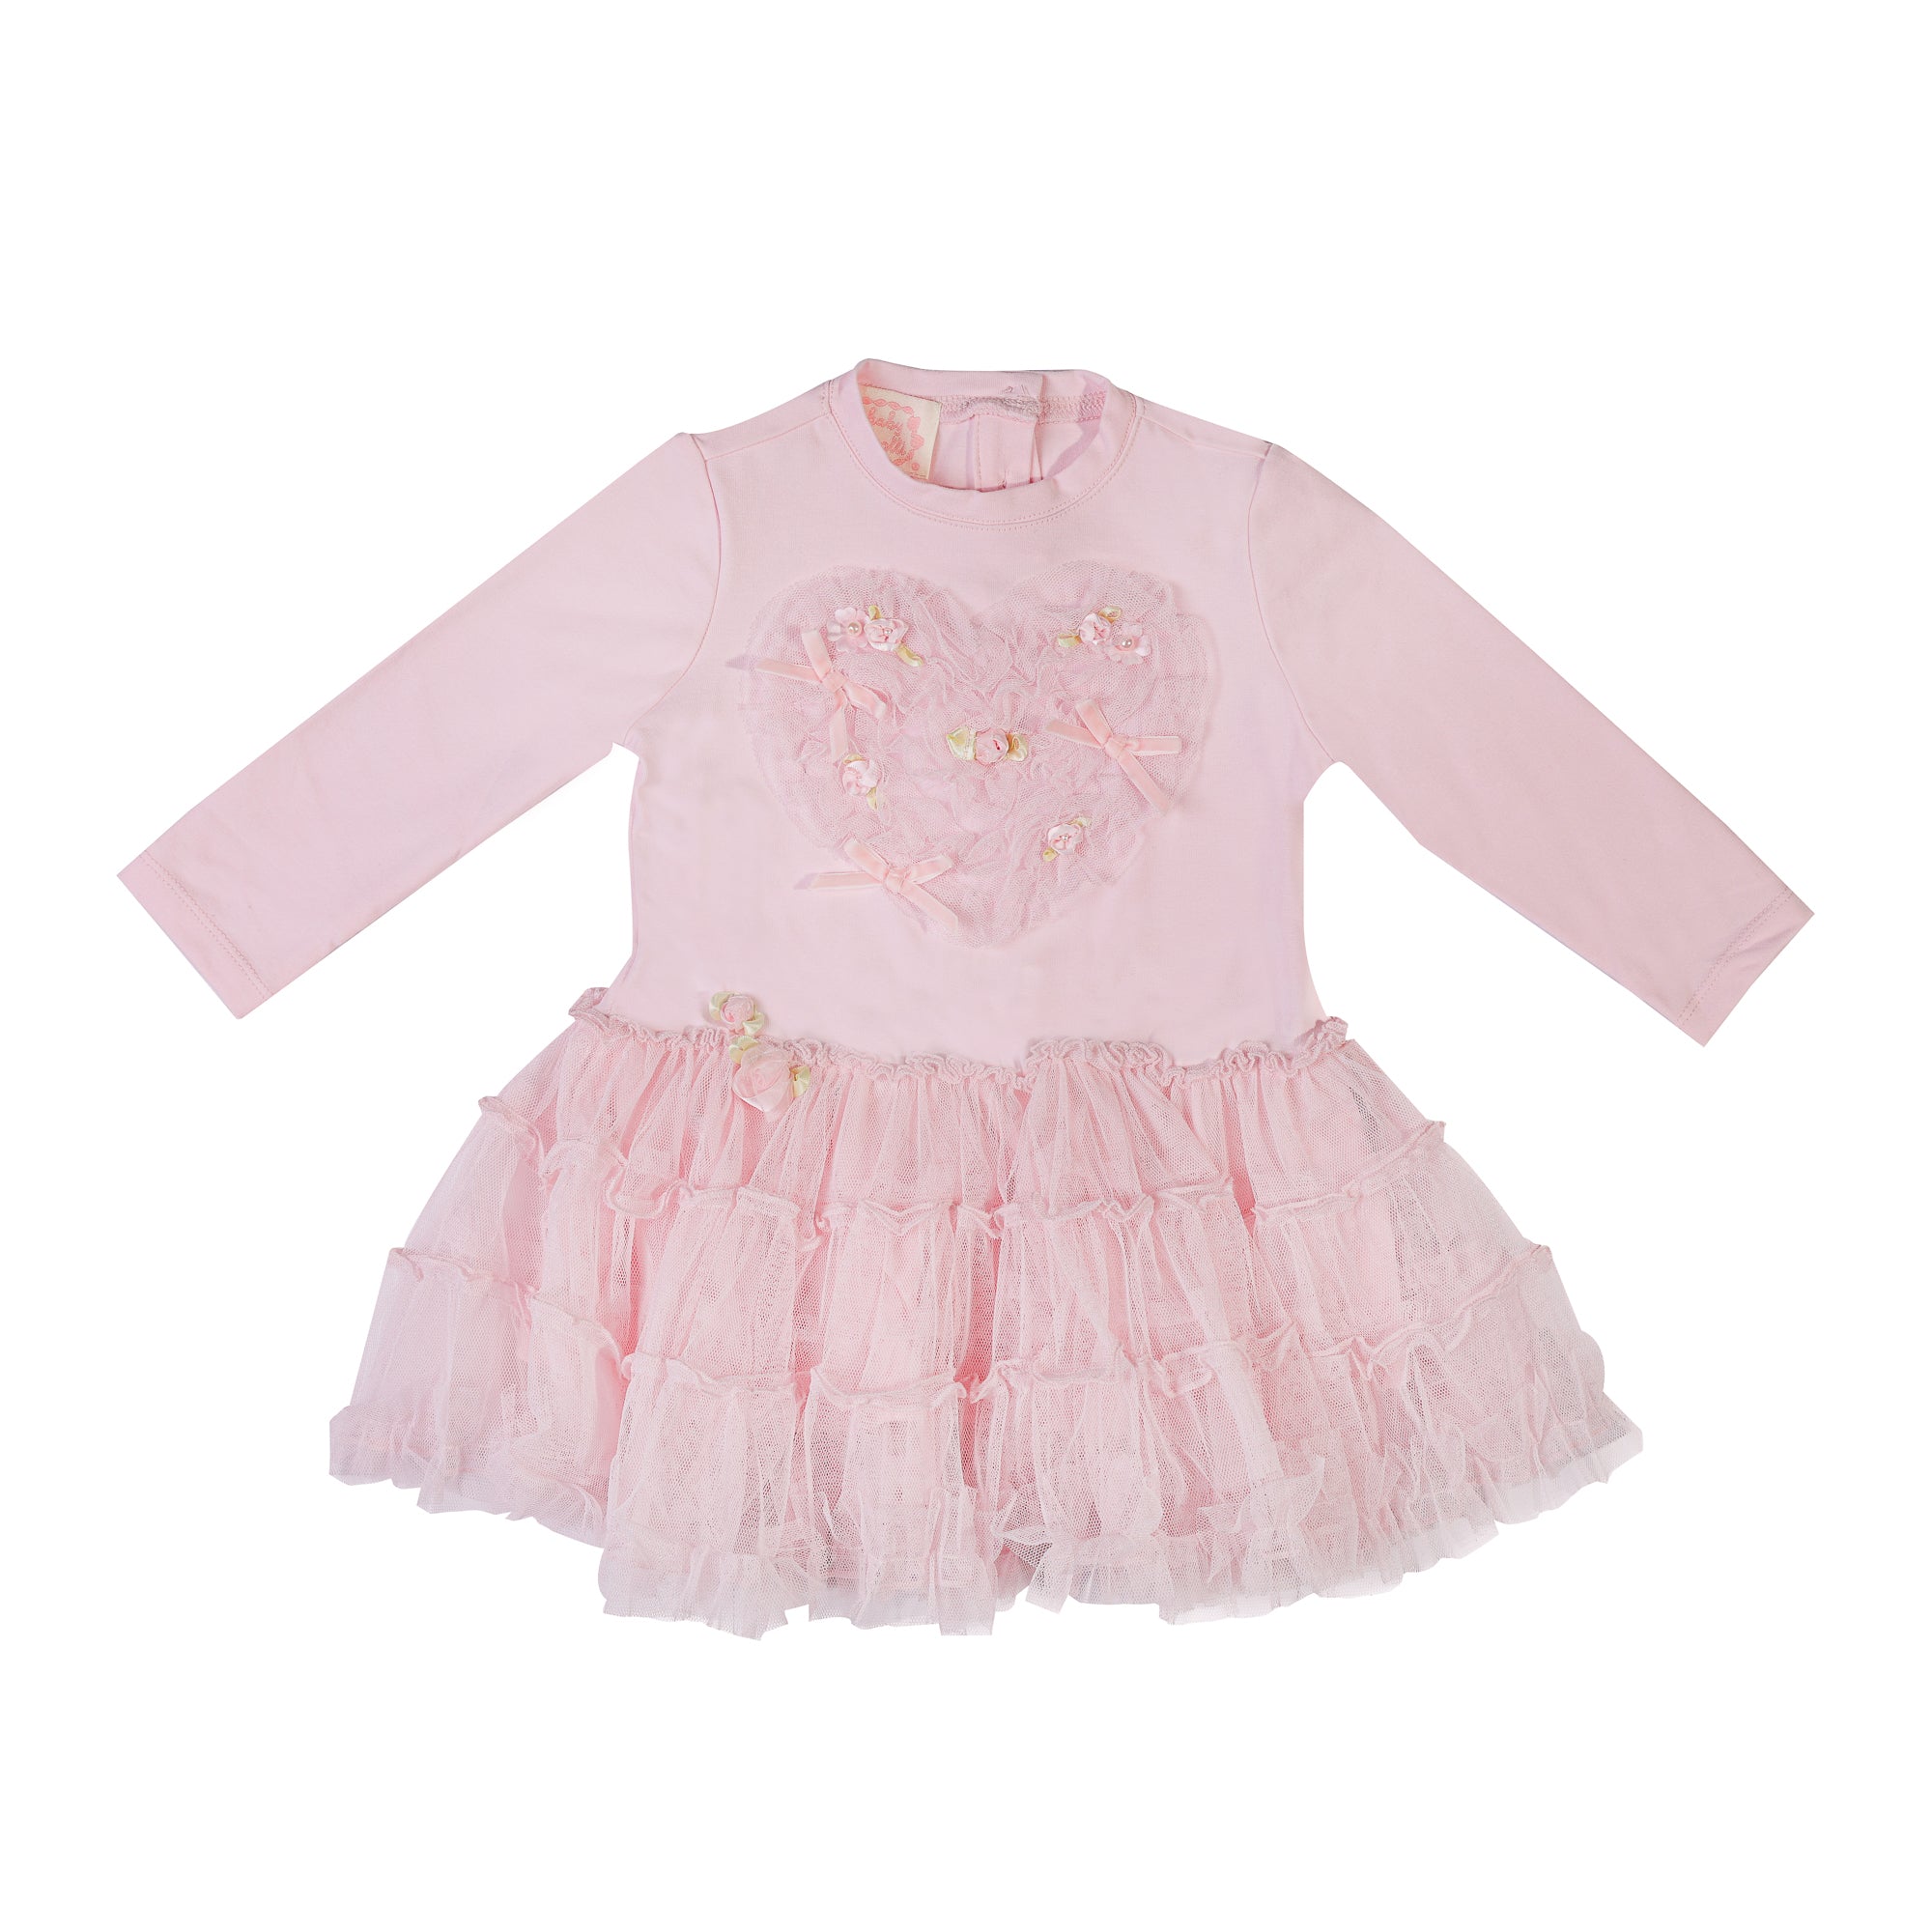 kate and mack pink long sleeve ruffle dress with embroidered heart and floral details on the front, and a tulle skirt 